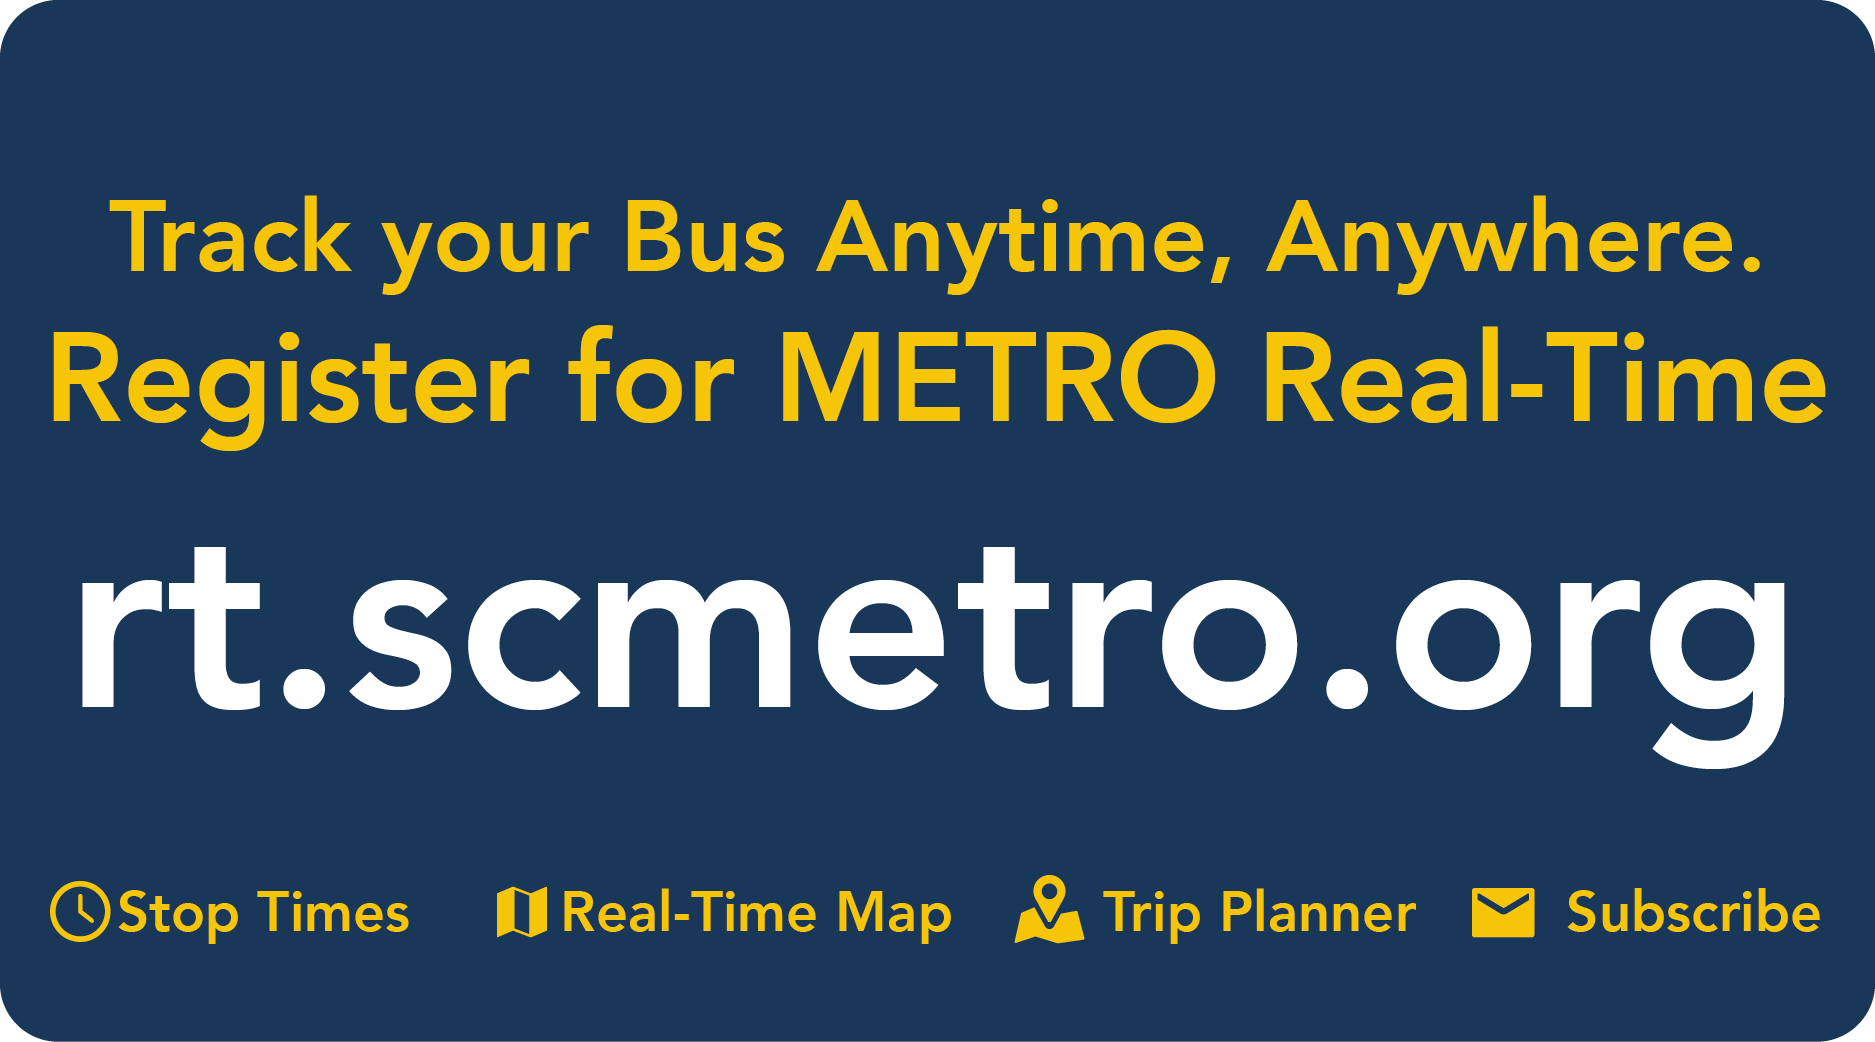 Track your Bus Anytime, Anywhere. Register for METRO Real-Time. Stop Times, Trip Planner Real-Time Map, Subscribe